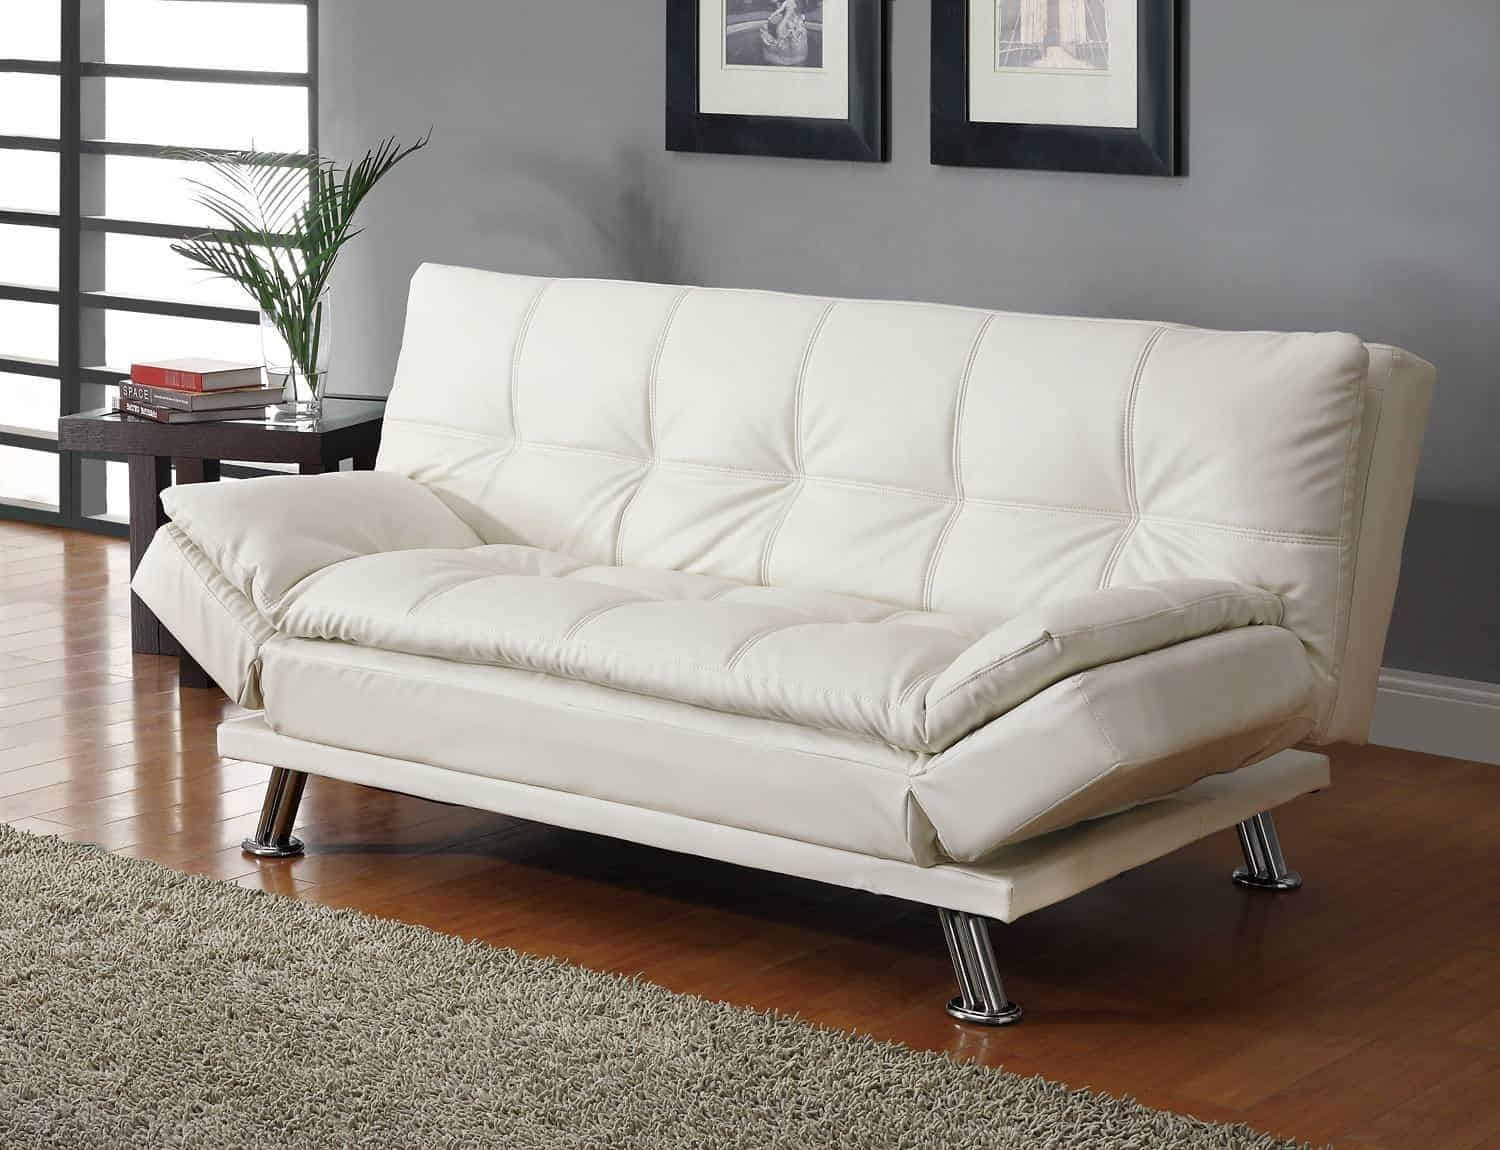 Perfect Sofa Bed for Your Guests